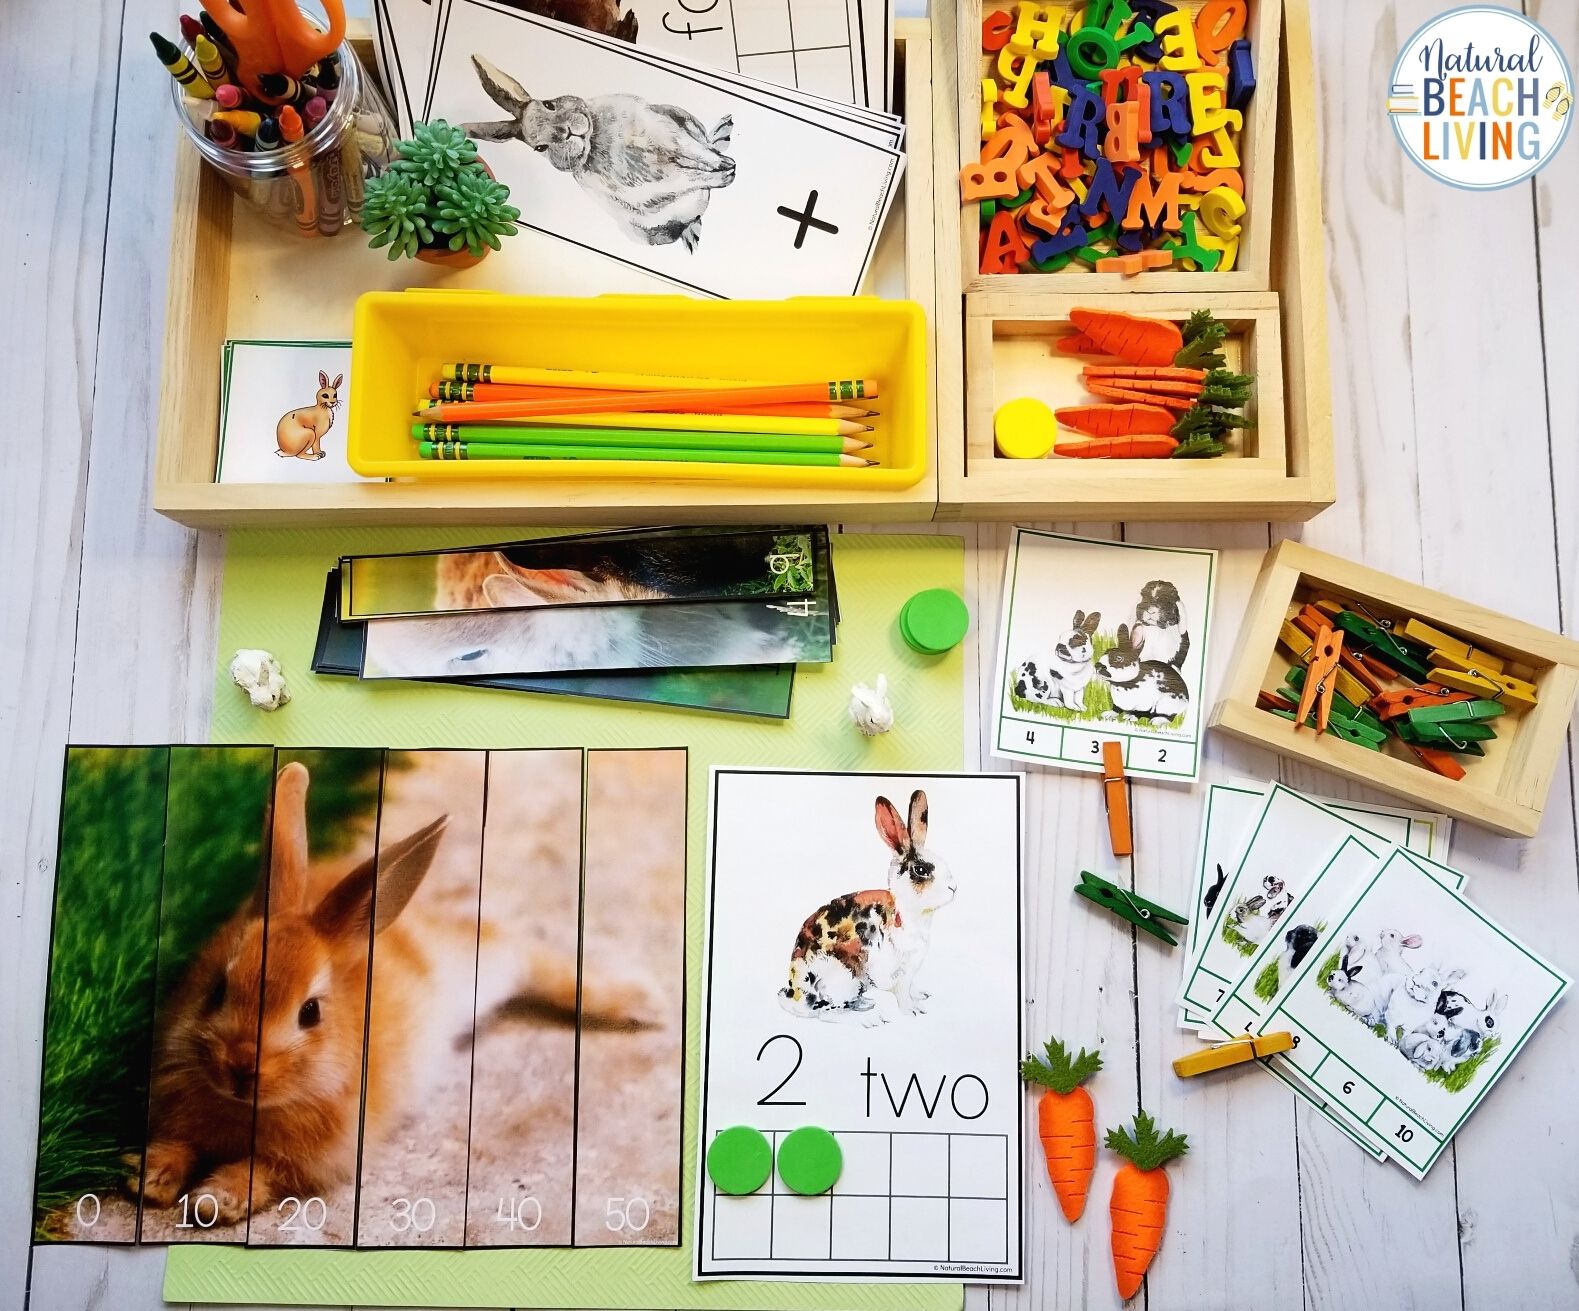 The Best Montessori Bunny Rabbit Themed Lesson Plans are perfect for learning with your preschoolers and Kindergarteners this Spring. Add this Bunny Unit Study and your kids will love learning. Bunny Rabbit Activities for spring theme.